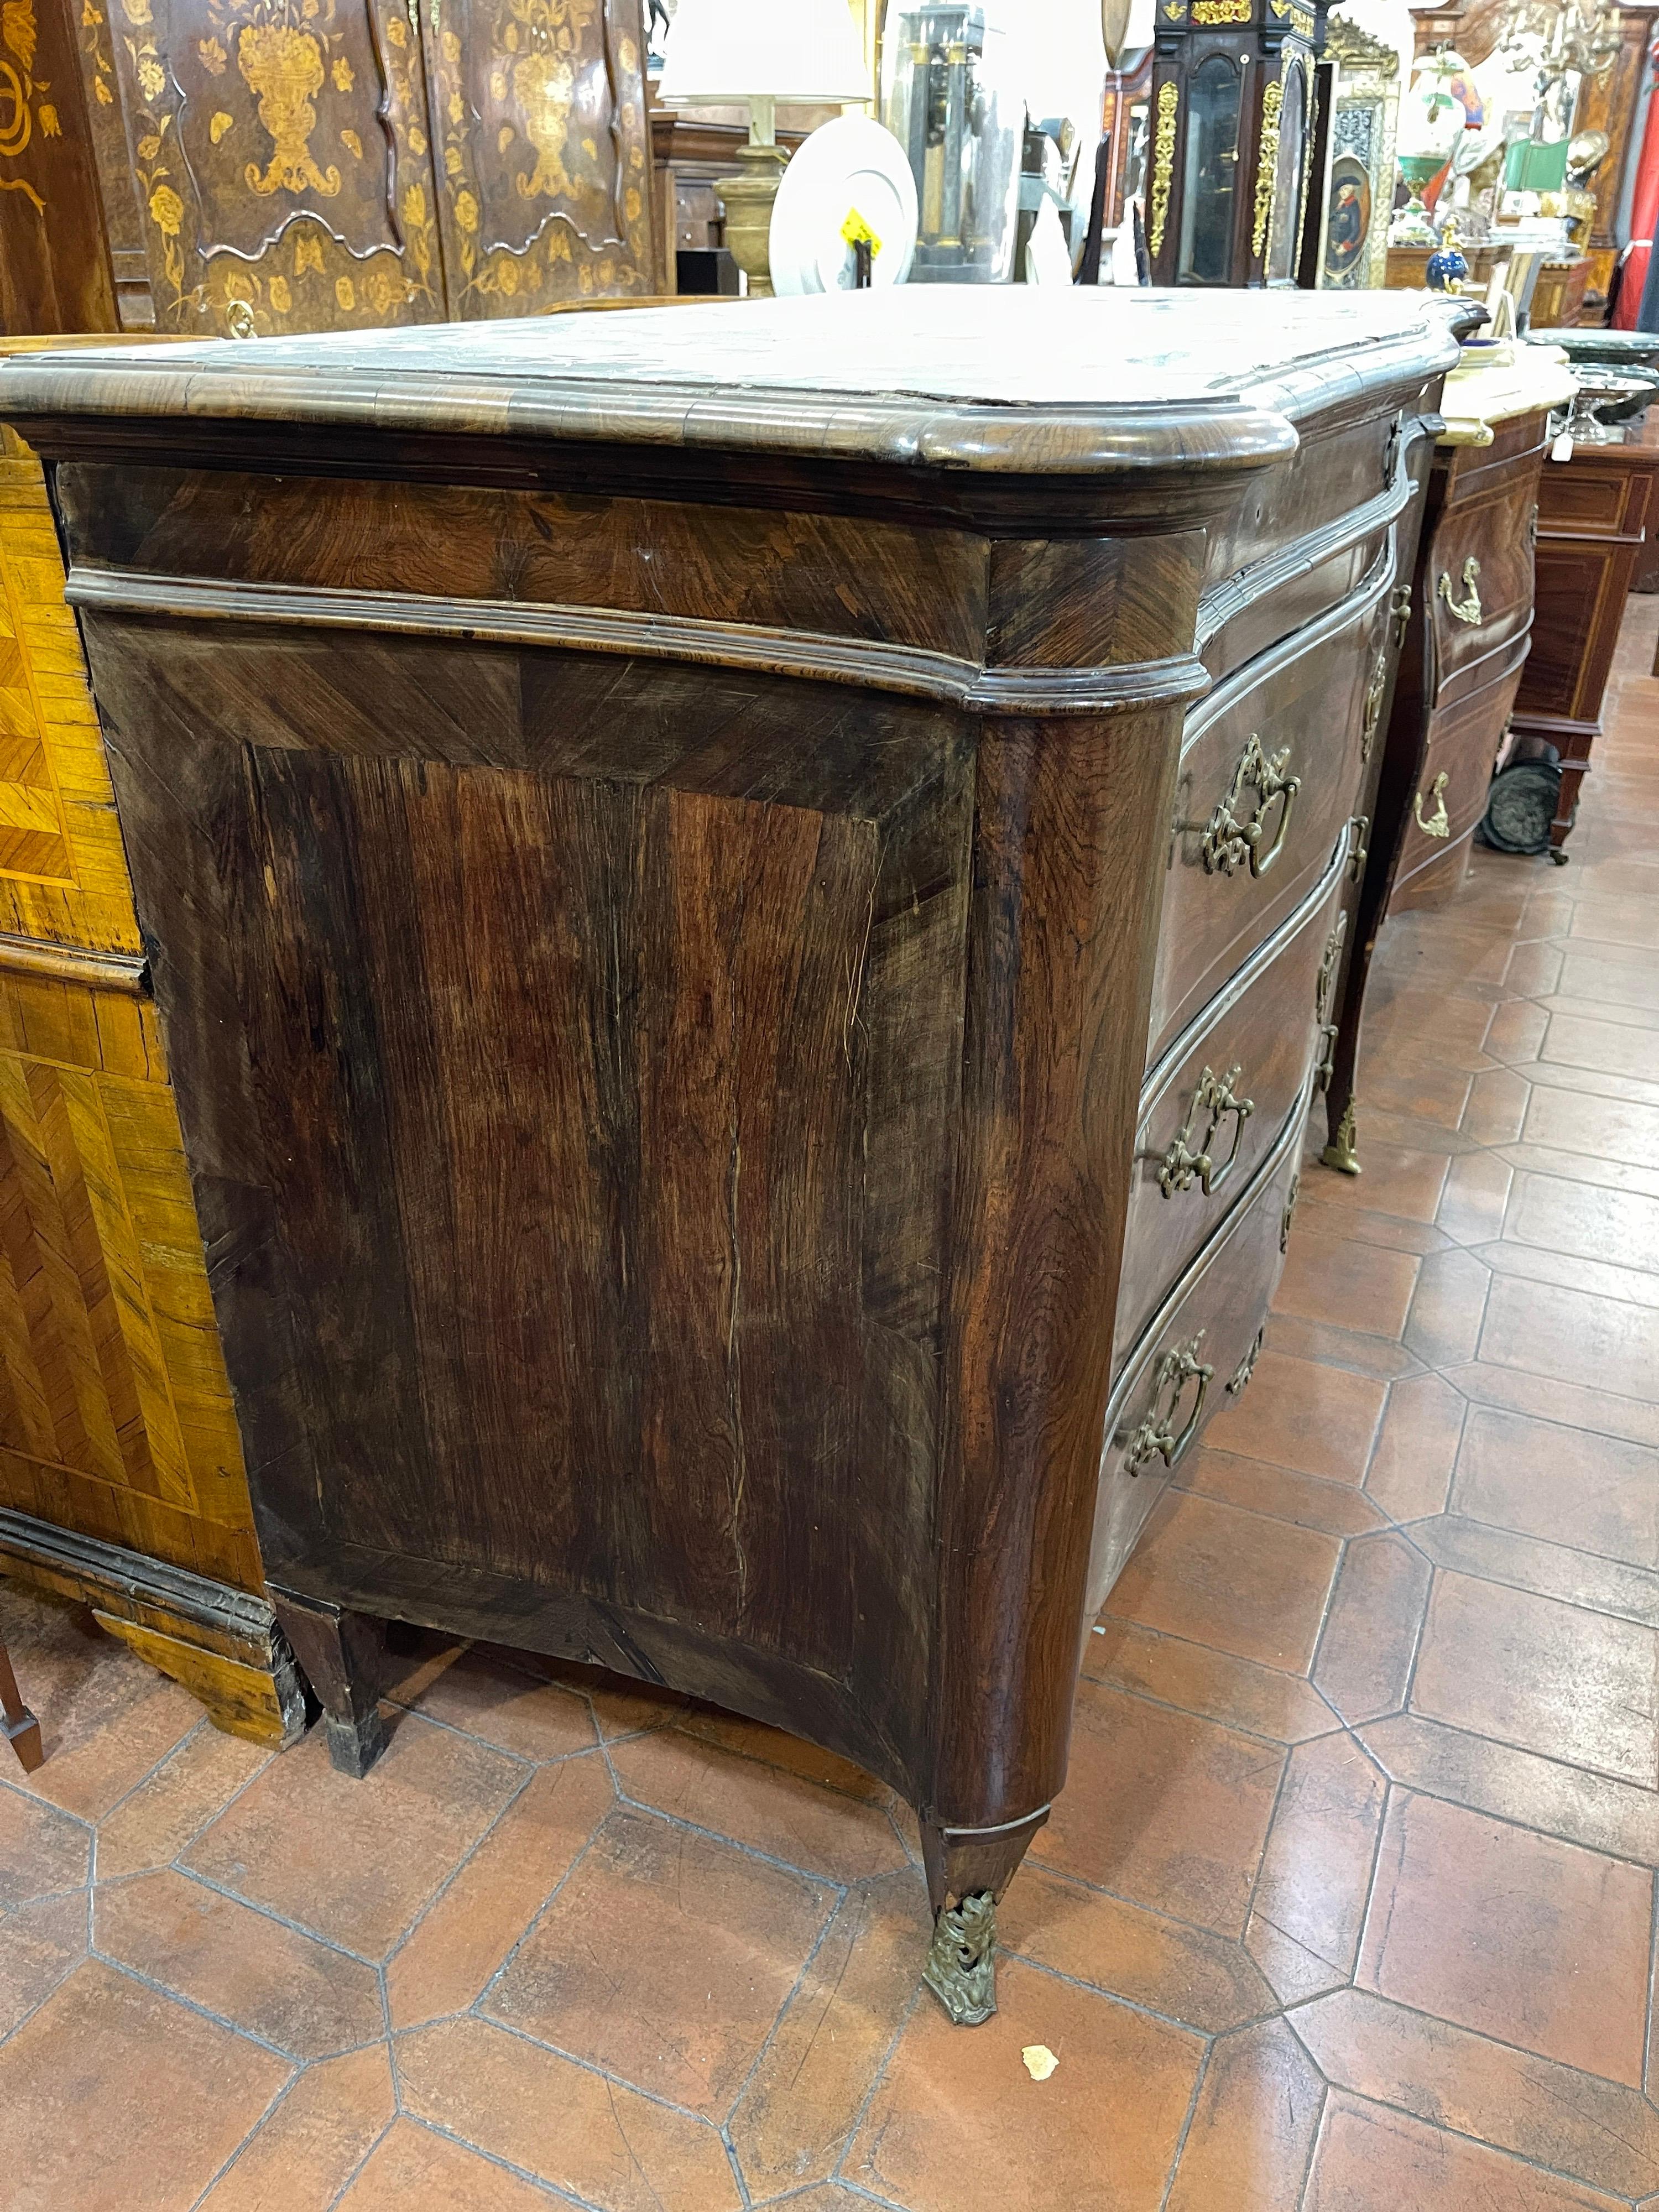 Fantastic Italian chest of drawers, from the Kingdom of Sicily, probably Palermo, rosewood and gilt bronze applications. Chest of drawers with 4 drawers, moved on the sides and marble embedded on the top. The cabinet is to be restored, all missing